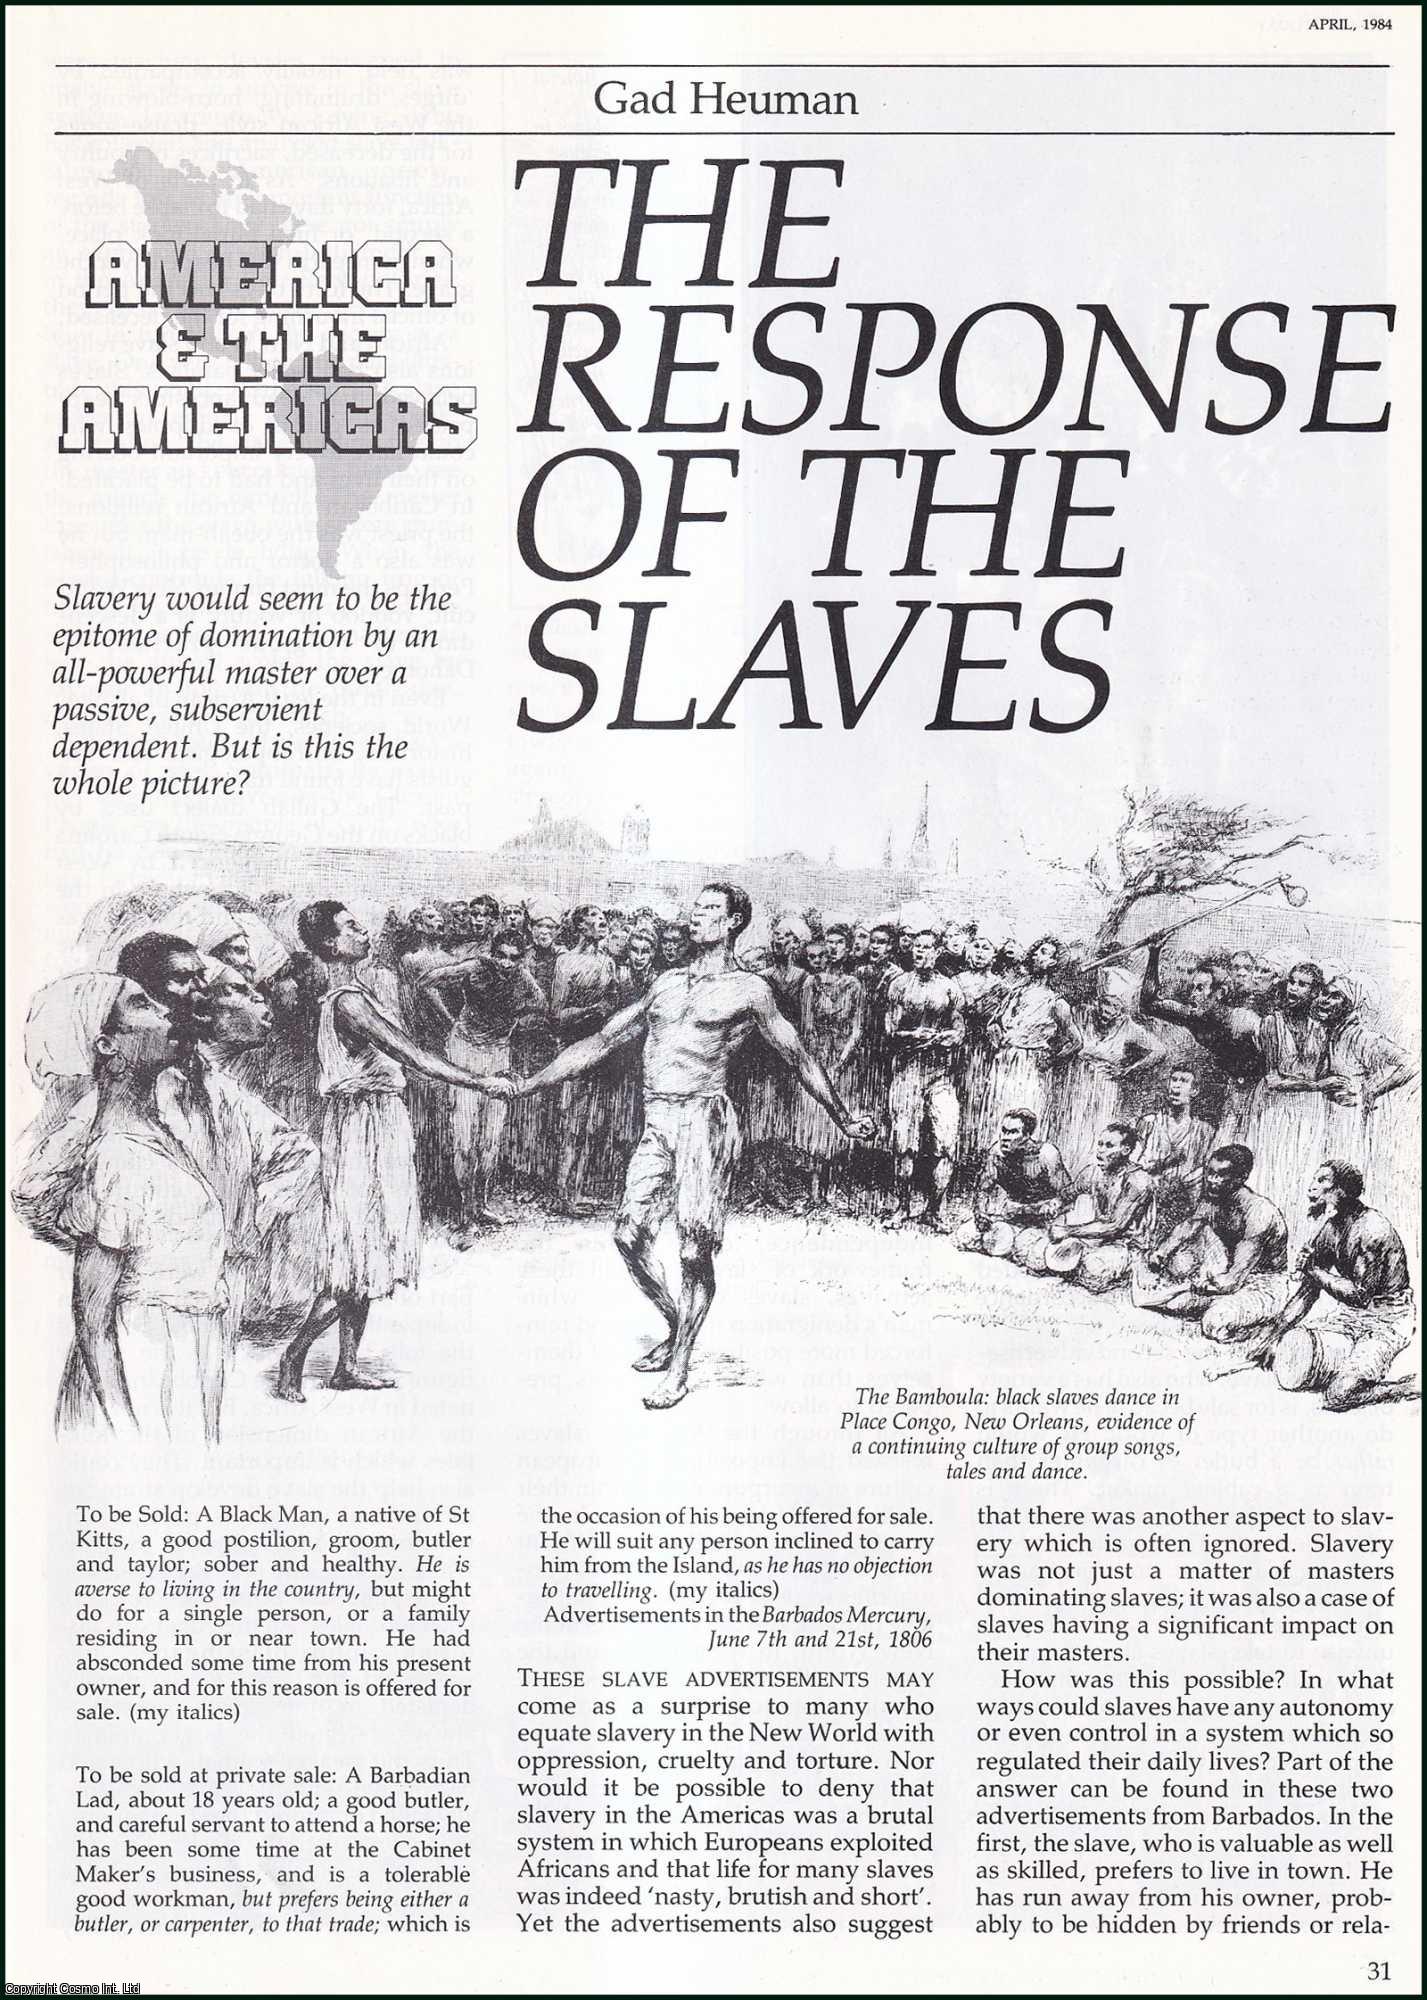 Gad Heuman - The Response of the Slaves: America and the Americas. An original article from History Today, 1984.